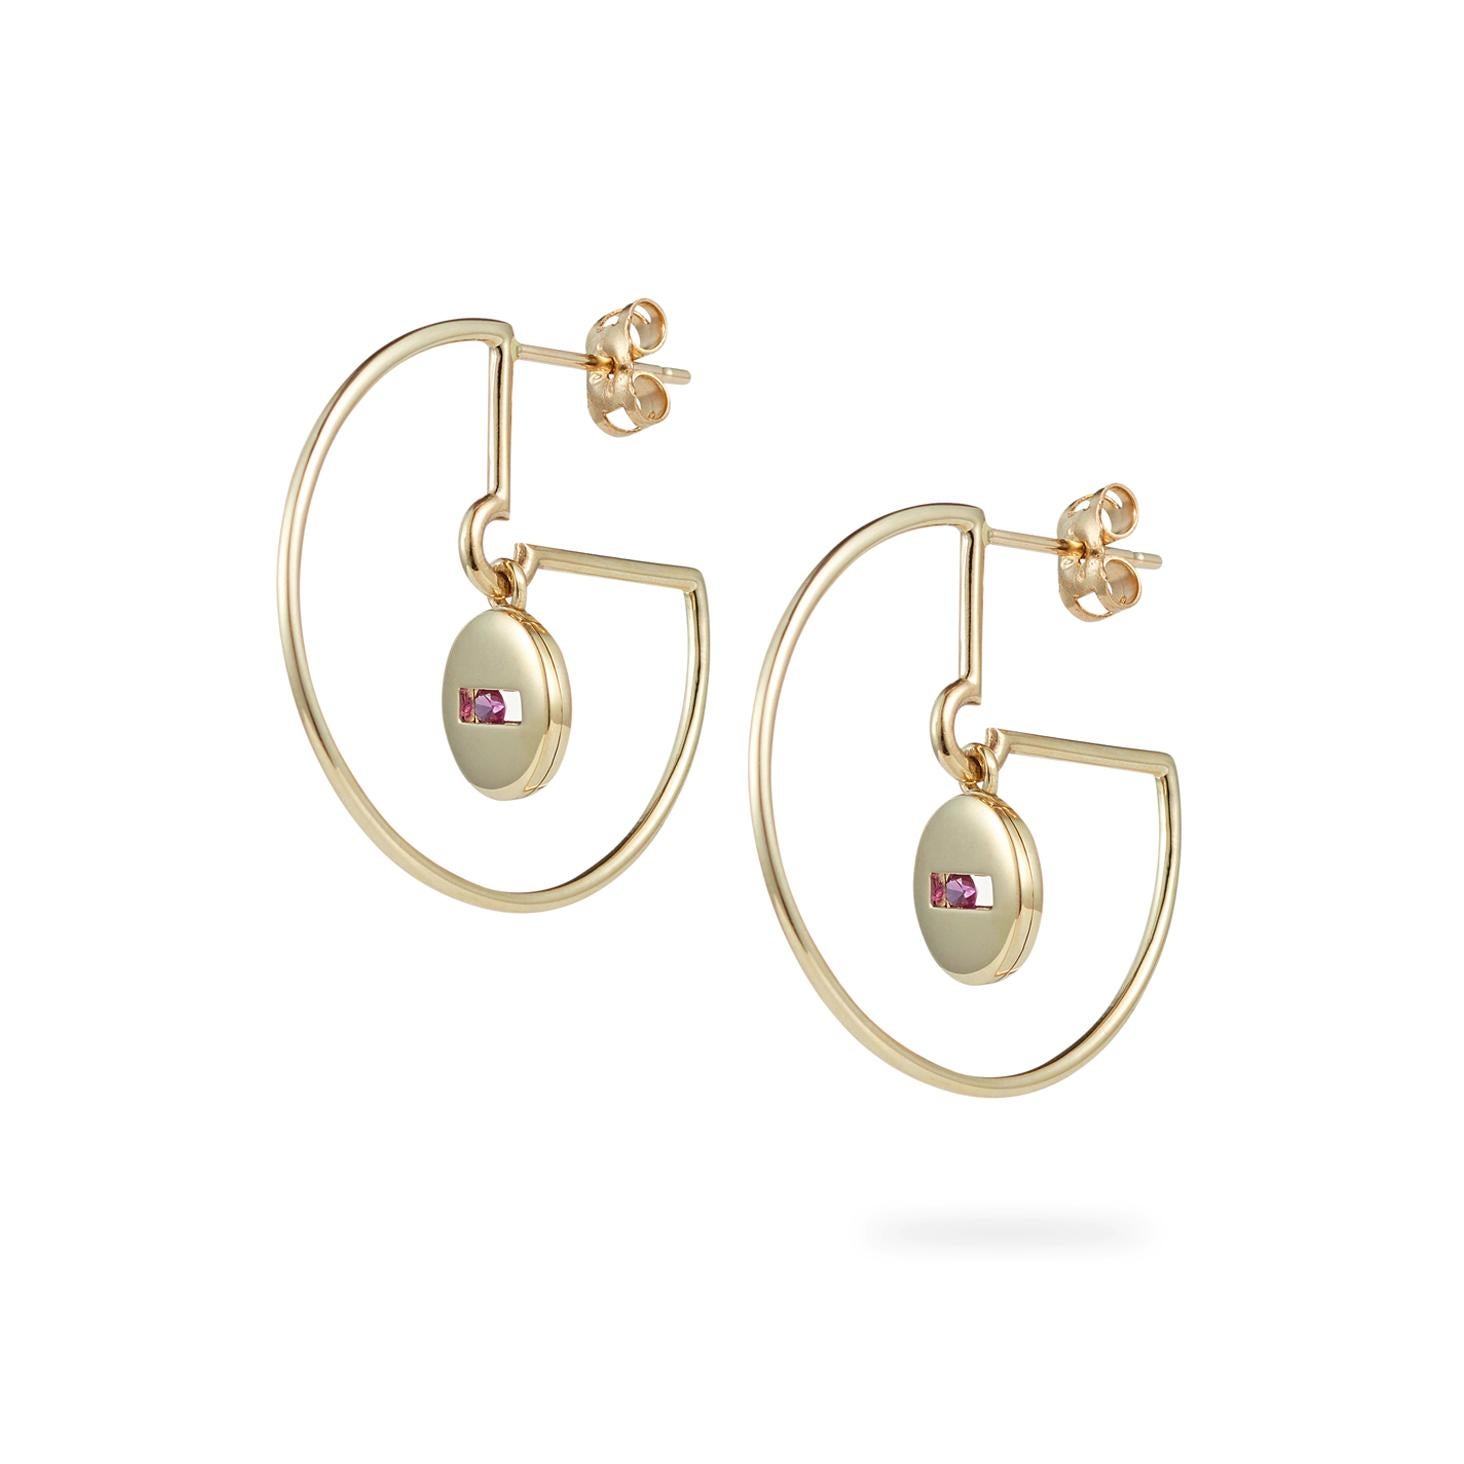 From the ROCK Collection. Each earring features the rolling rock elements hanging freely from the centre of each hoop, set with pink sapphires that move freely within their settings.

14ct yellow gold (nickel free)
Hoops measure 27mm across
Made